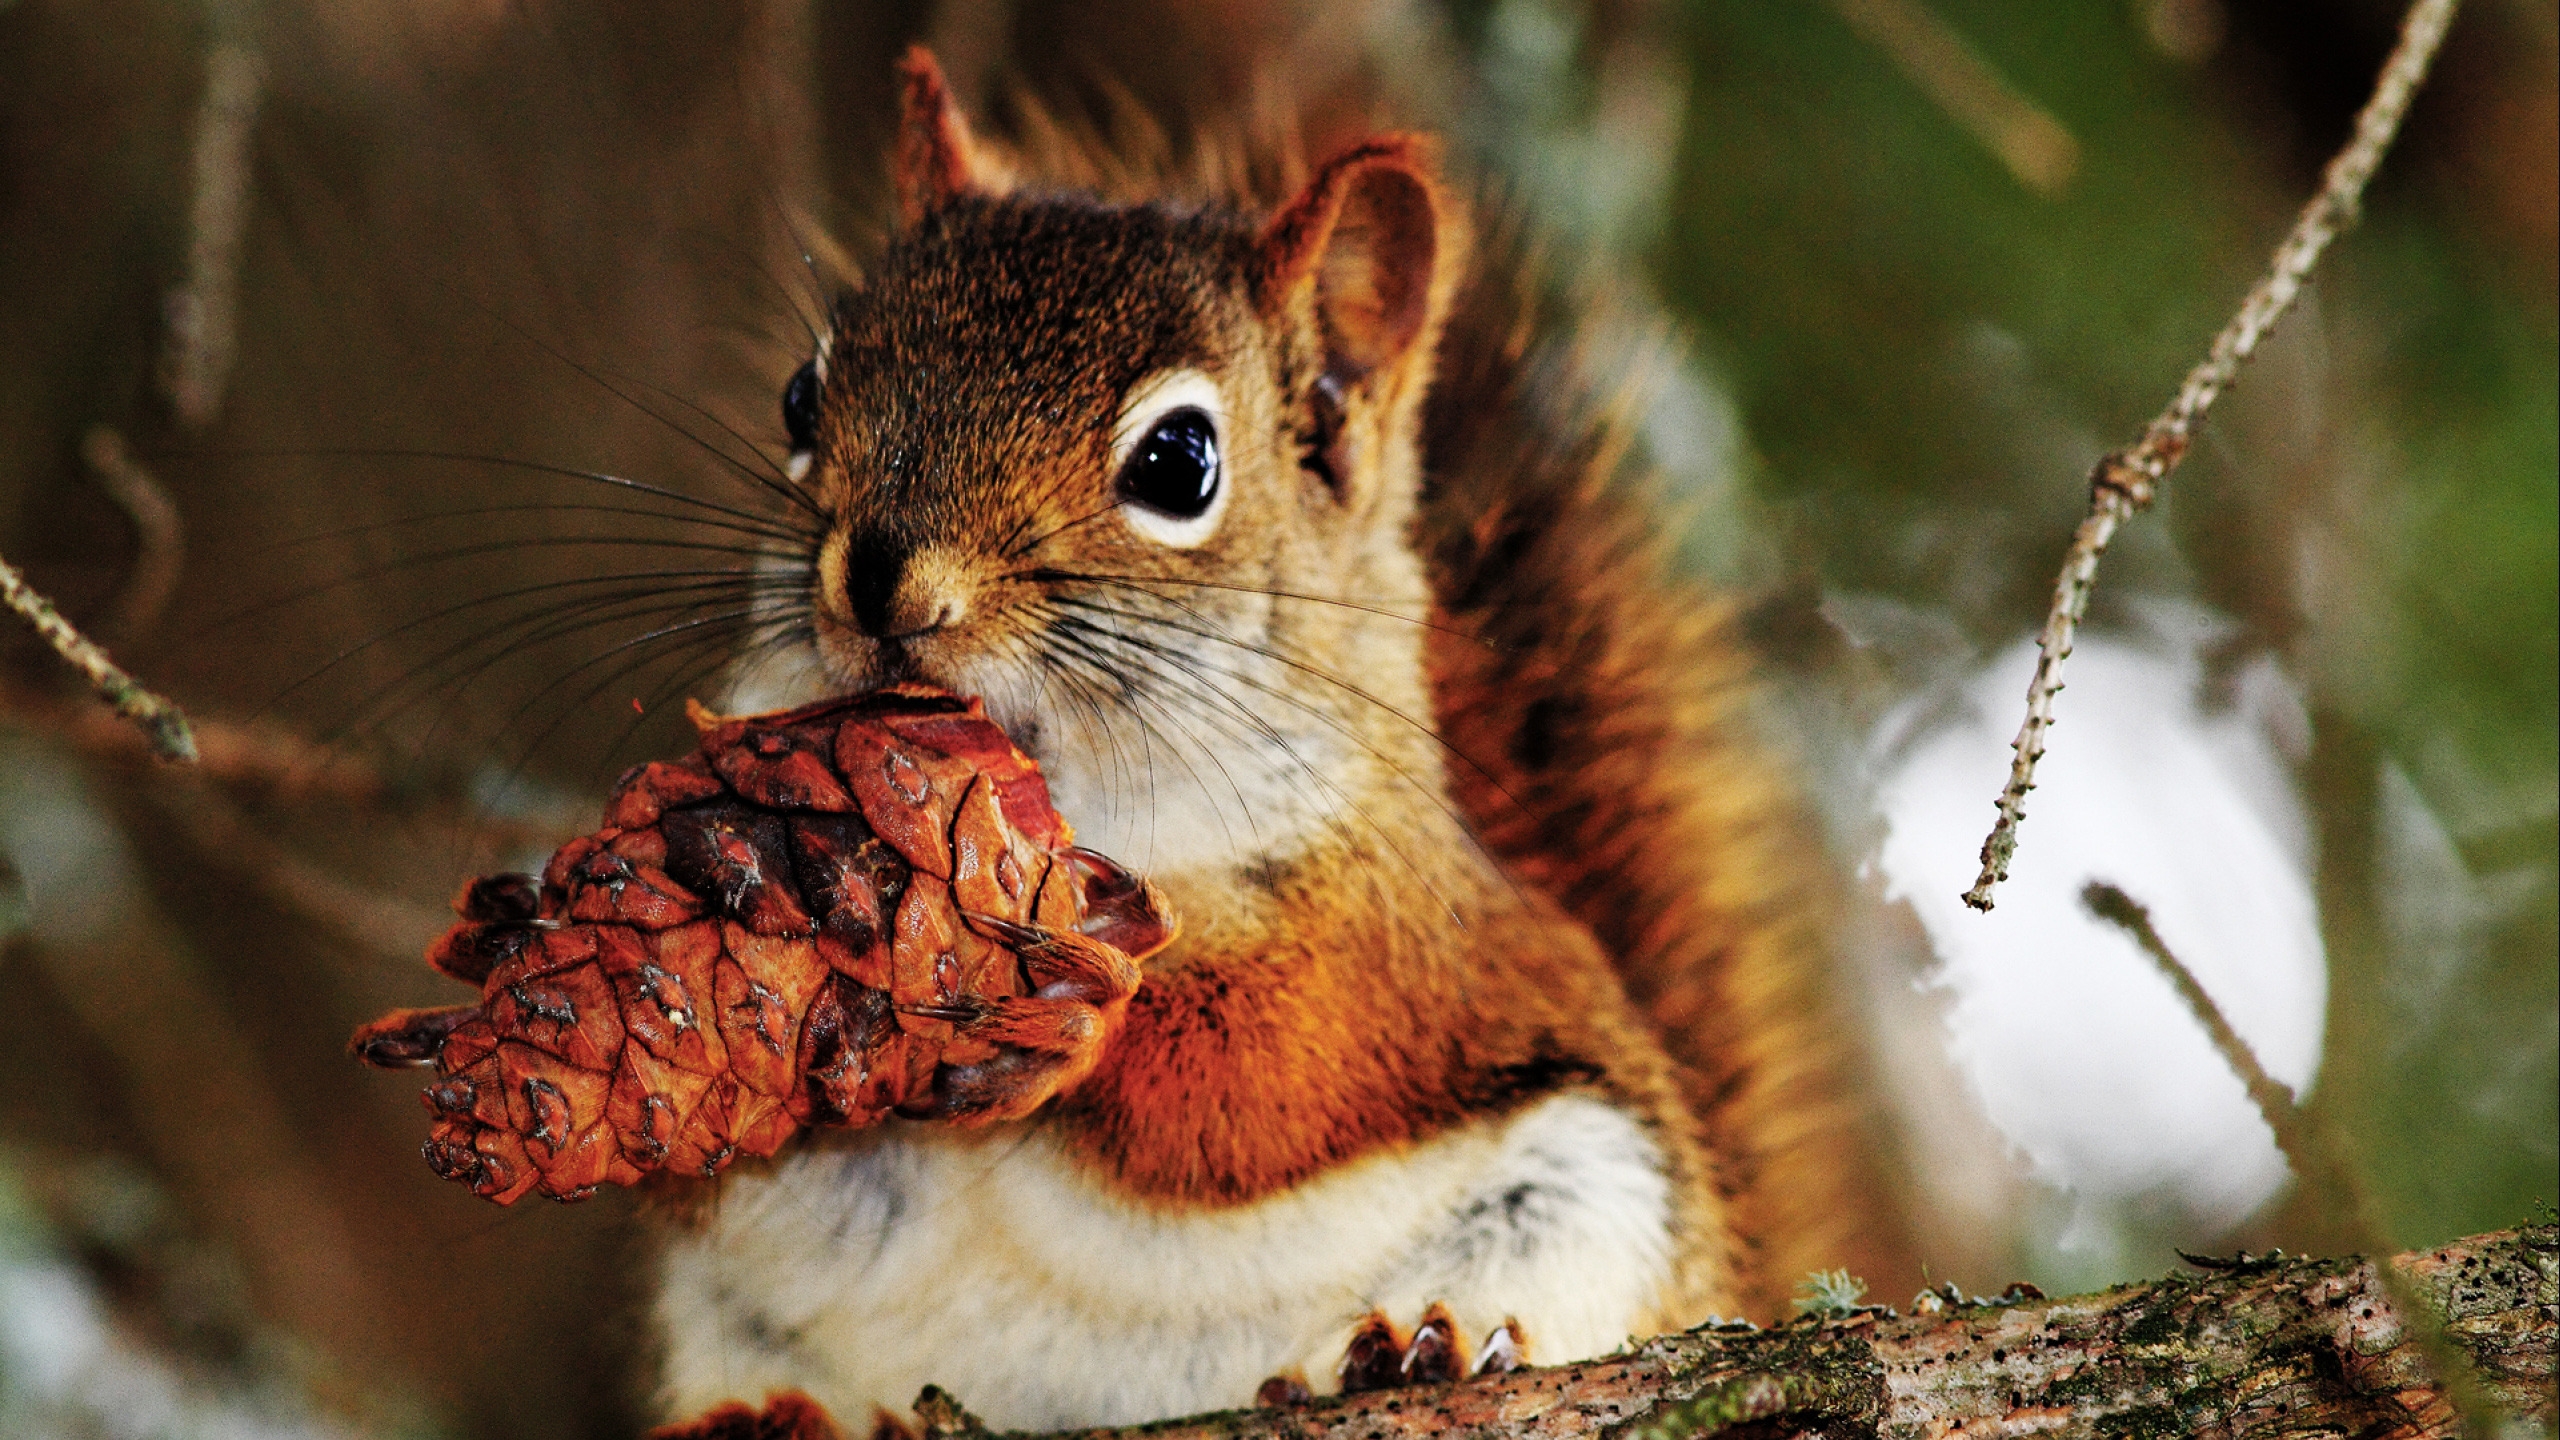 Cute Little Squirrel for 2560x1440 HDTV resolution